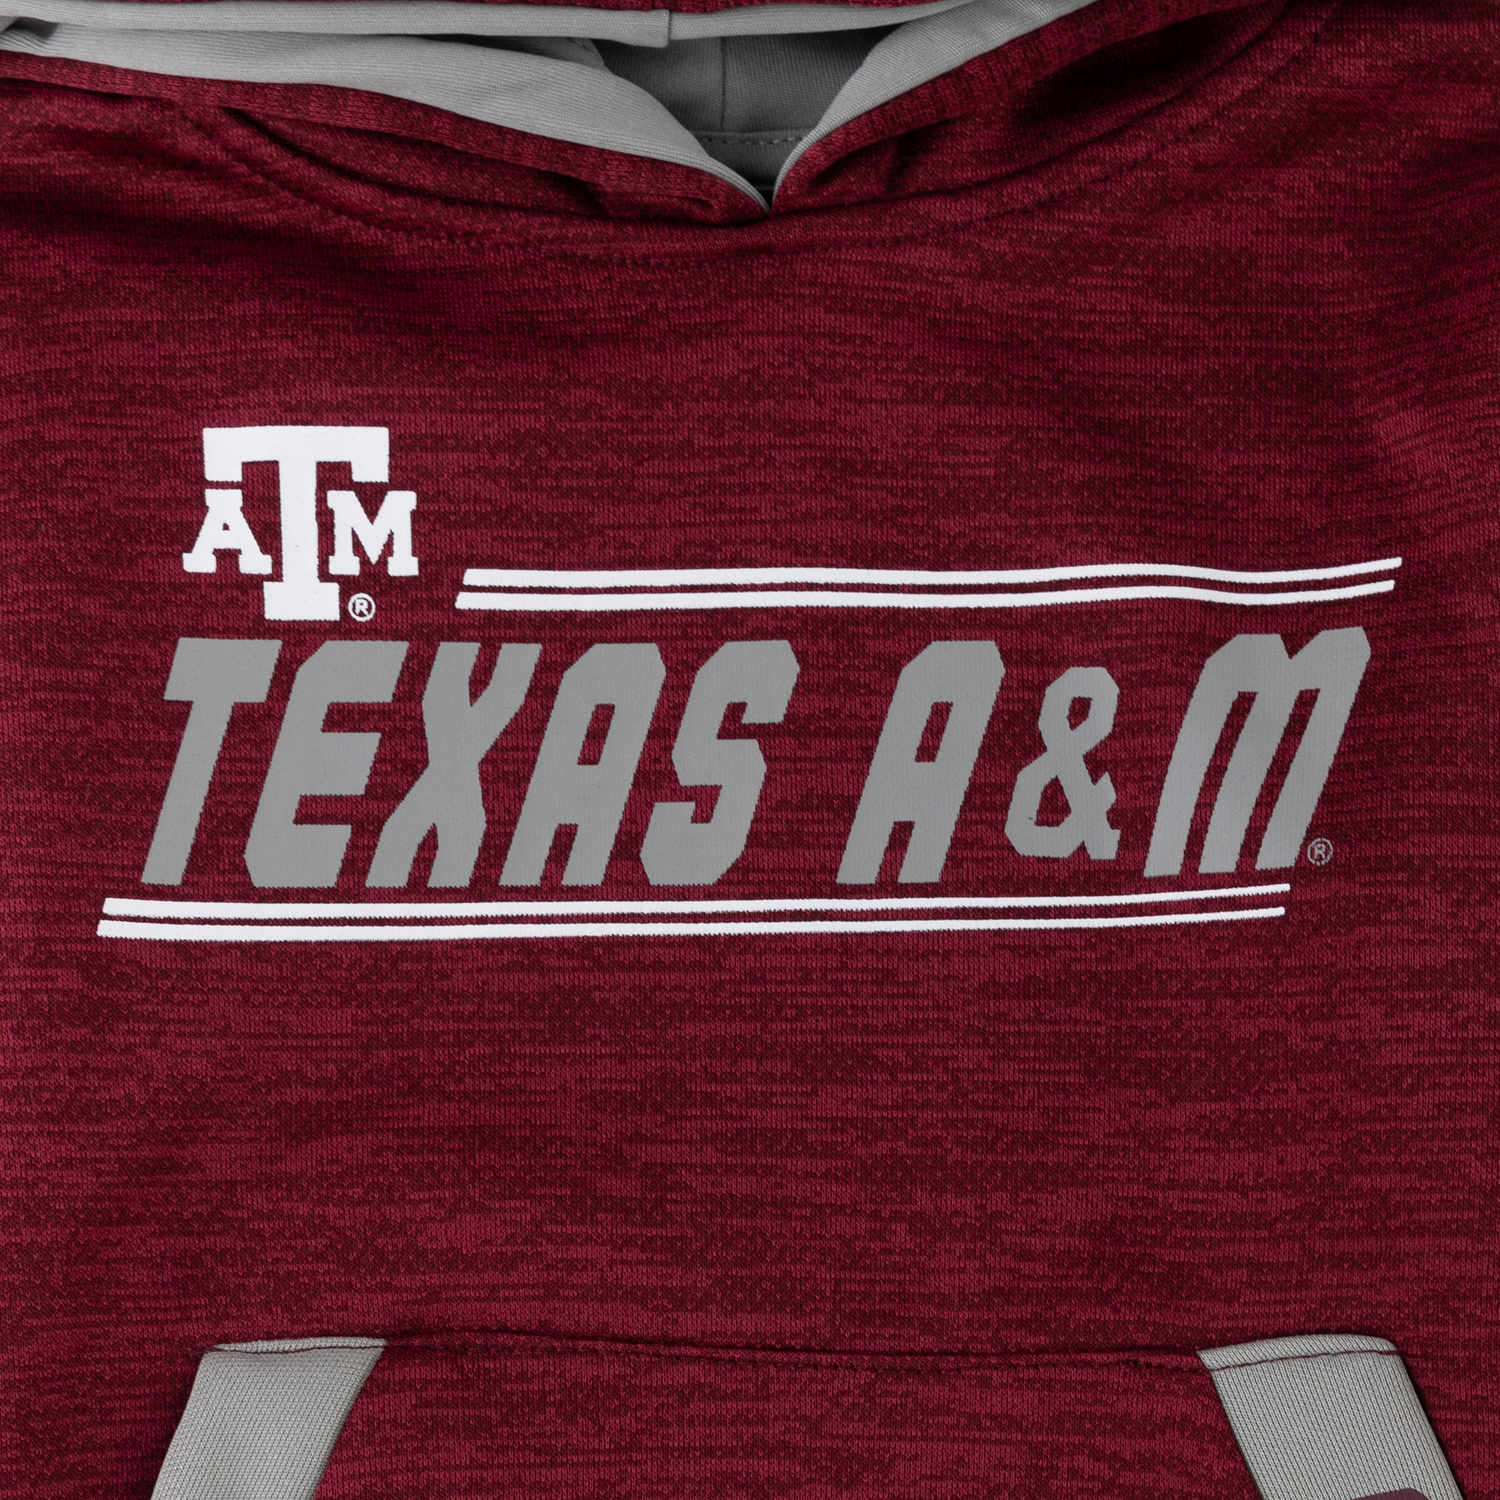 Texas A&M Toddler Live Hardcore Hoodie